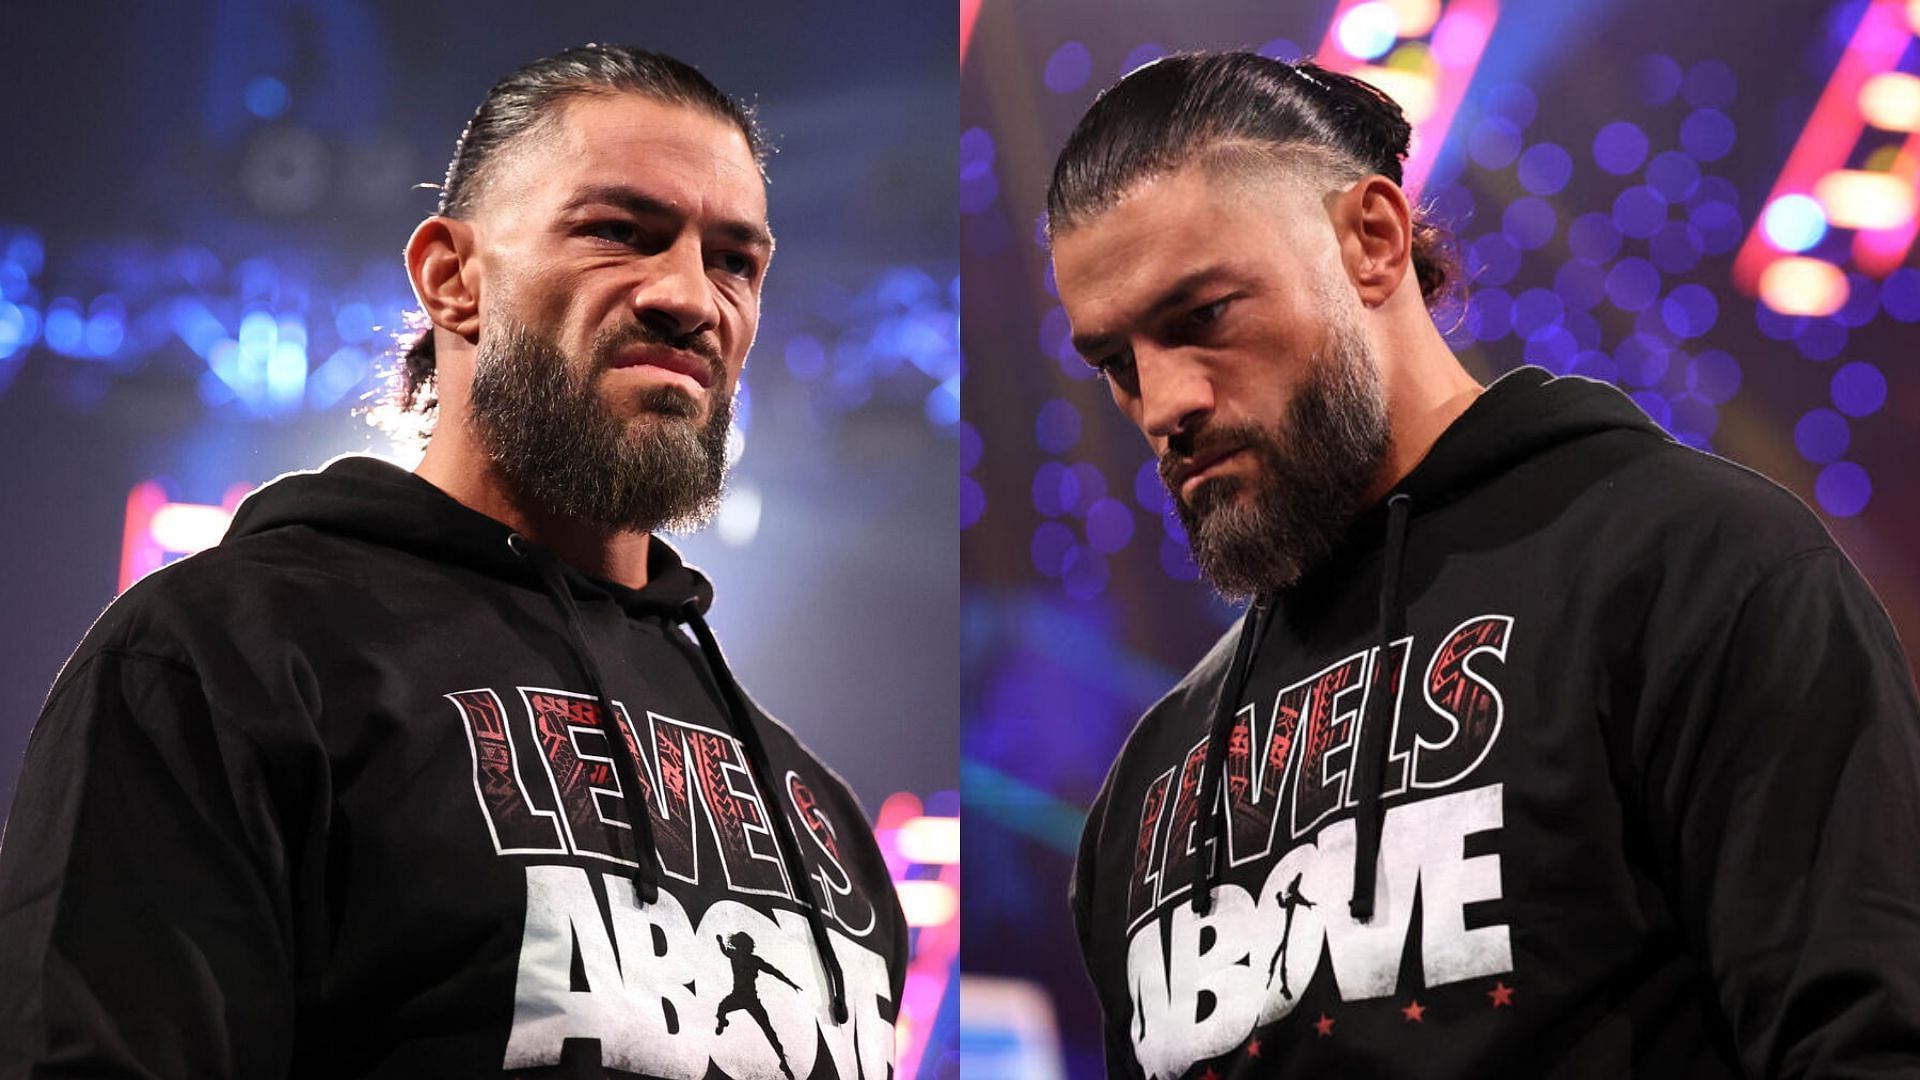 Reigns will be competing twice at WrestleMania.